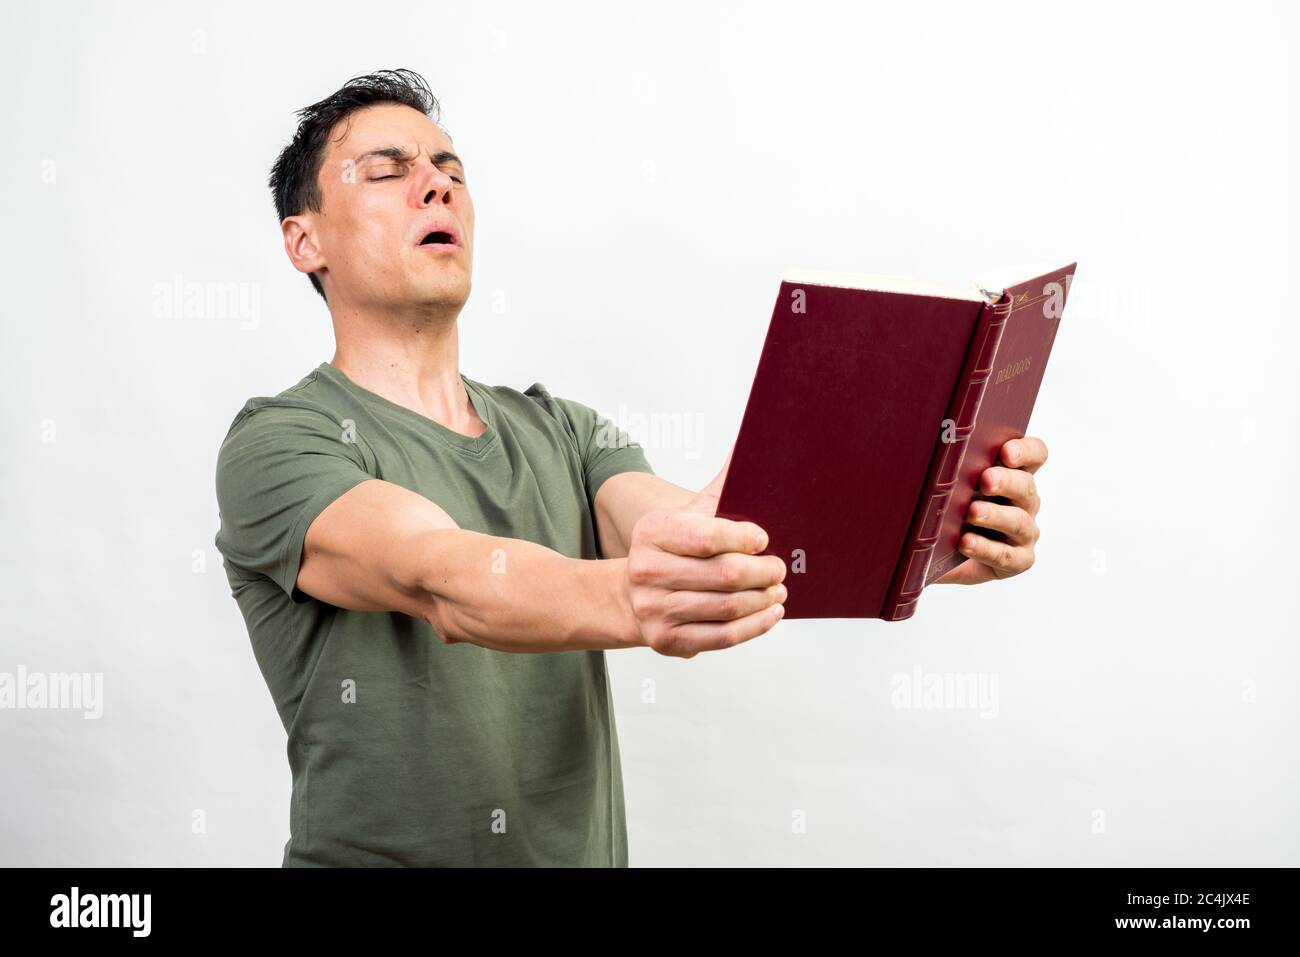 Man spreading a book as far as he can with his arms because he can't see well. Stock Photo